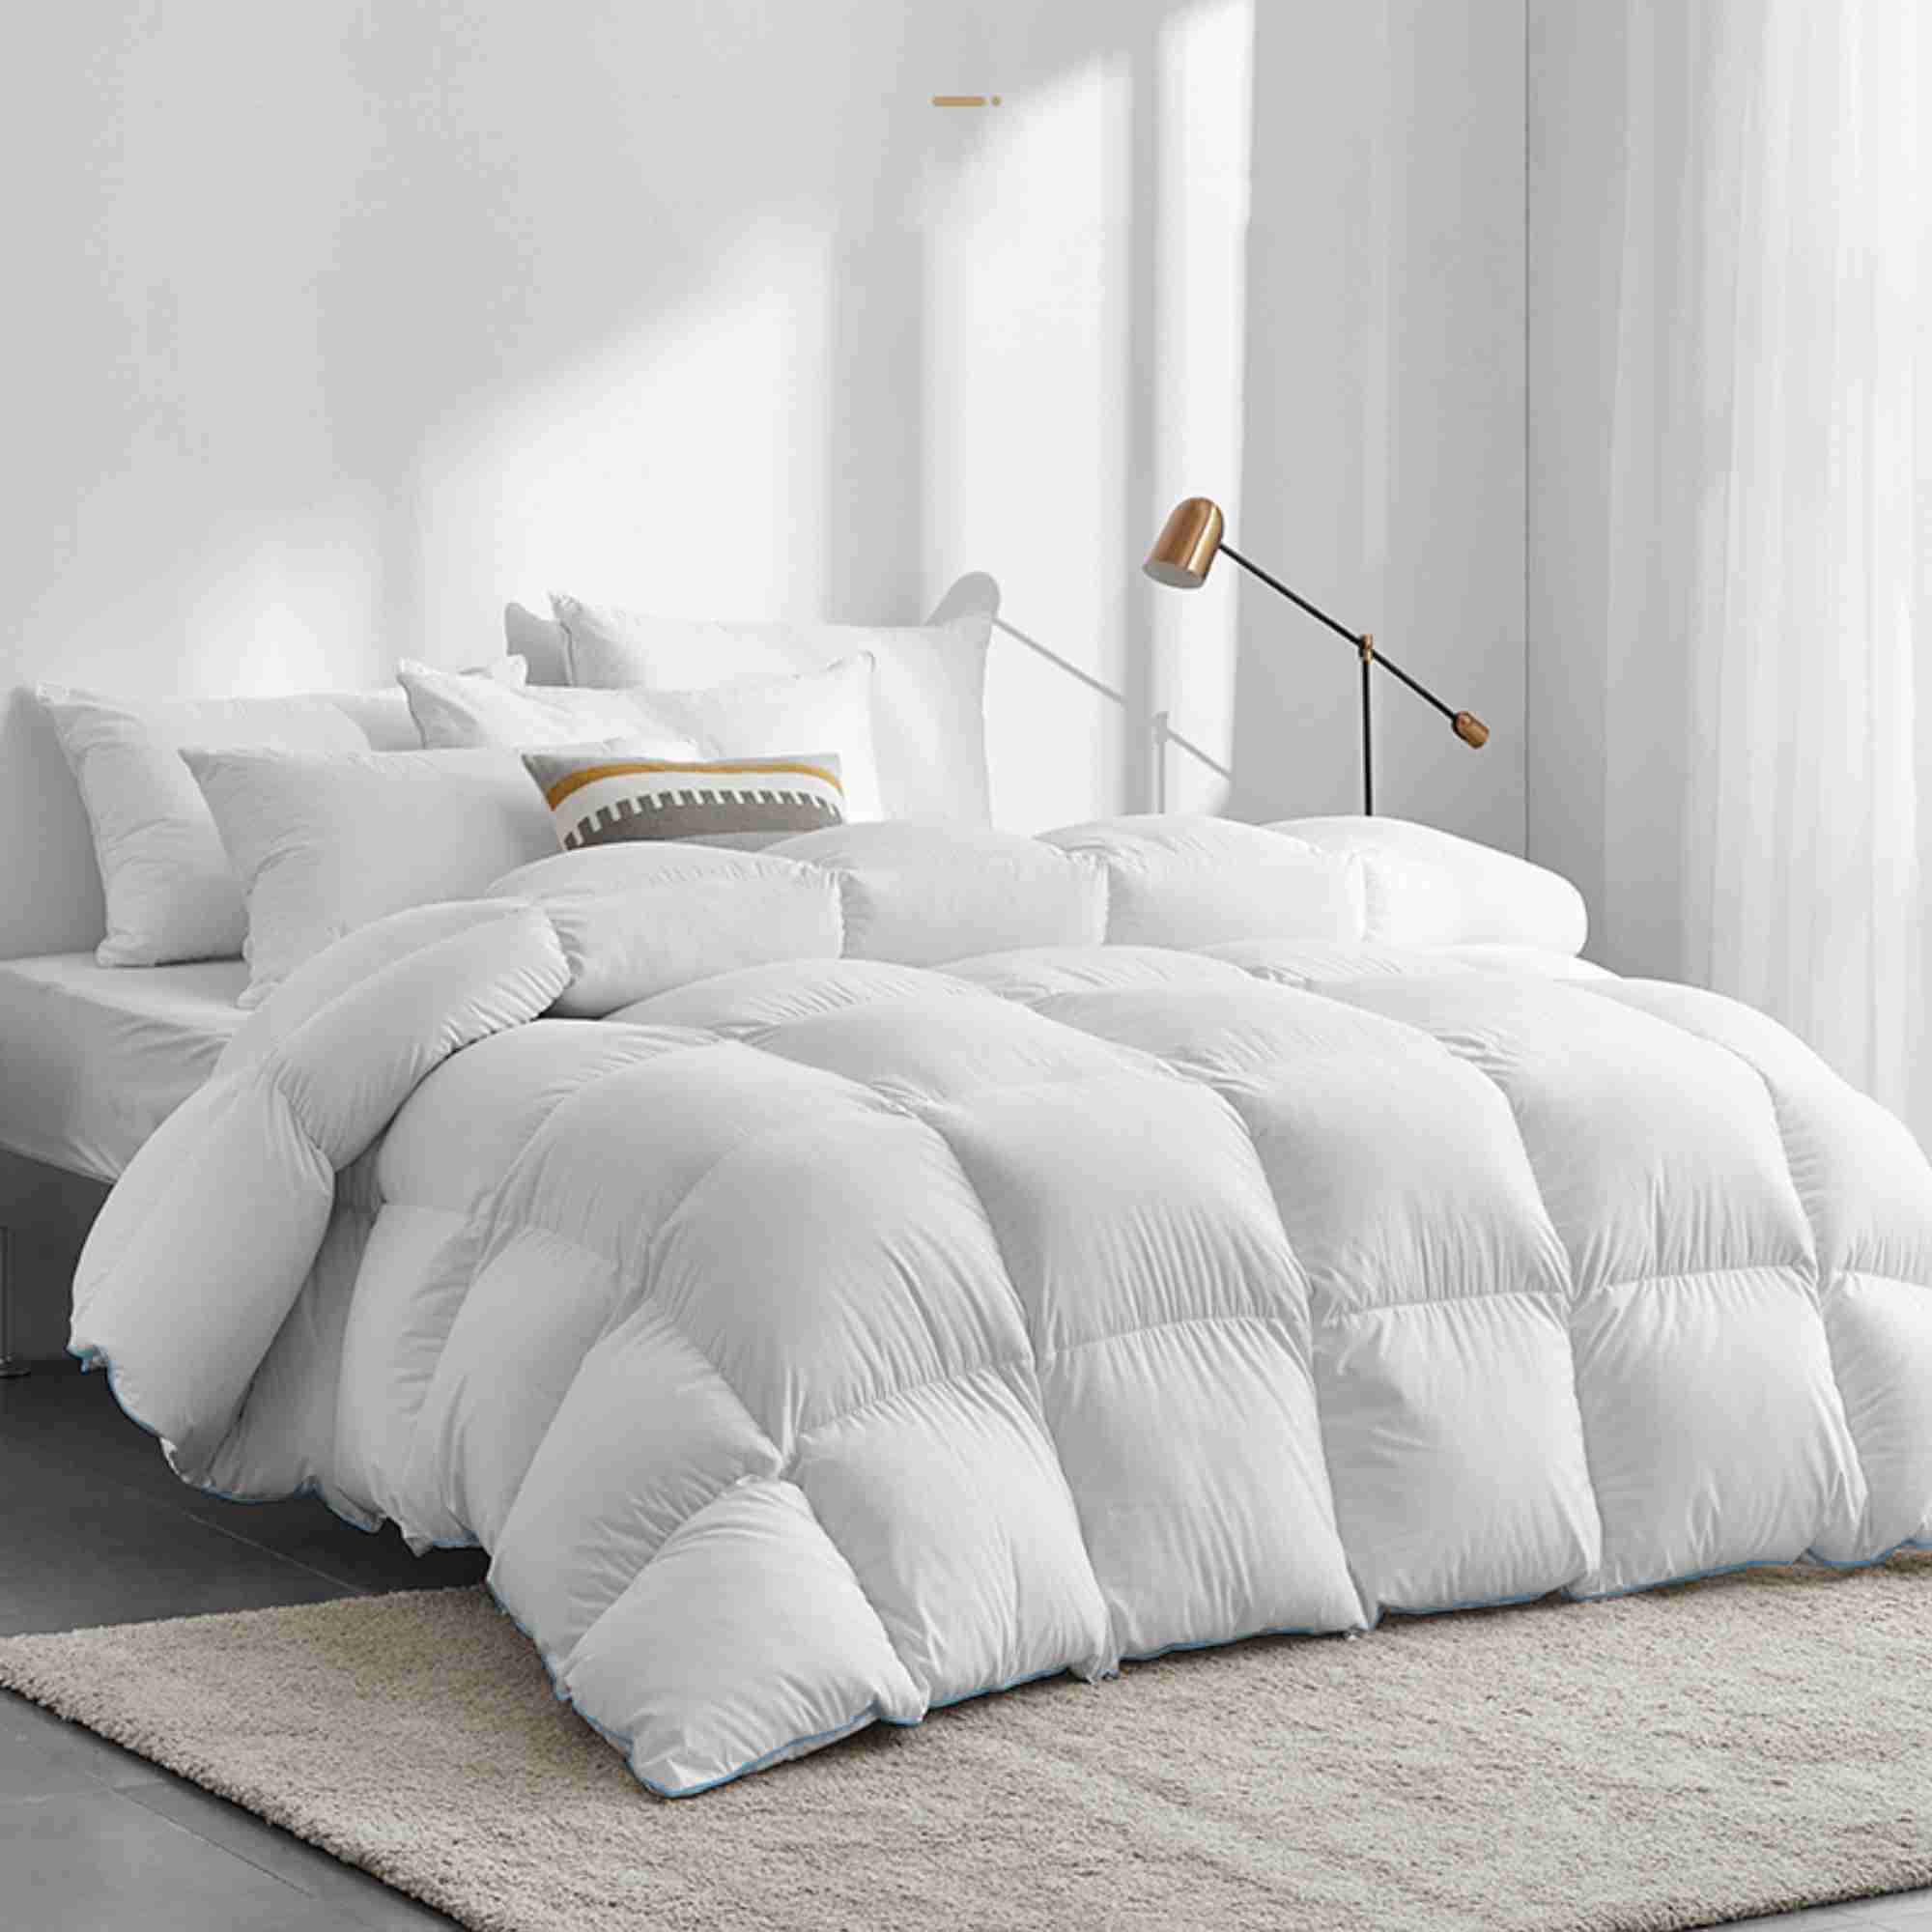 heavyweight-down-comforter-king-size-hotel-collection for cheap